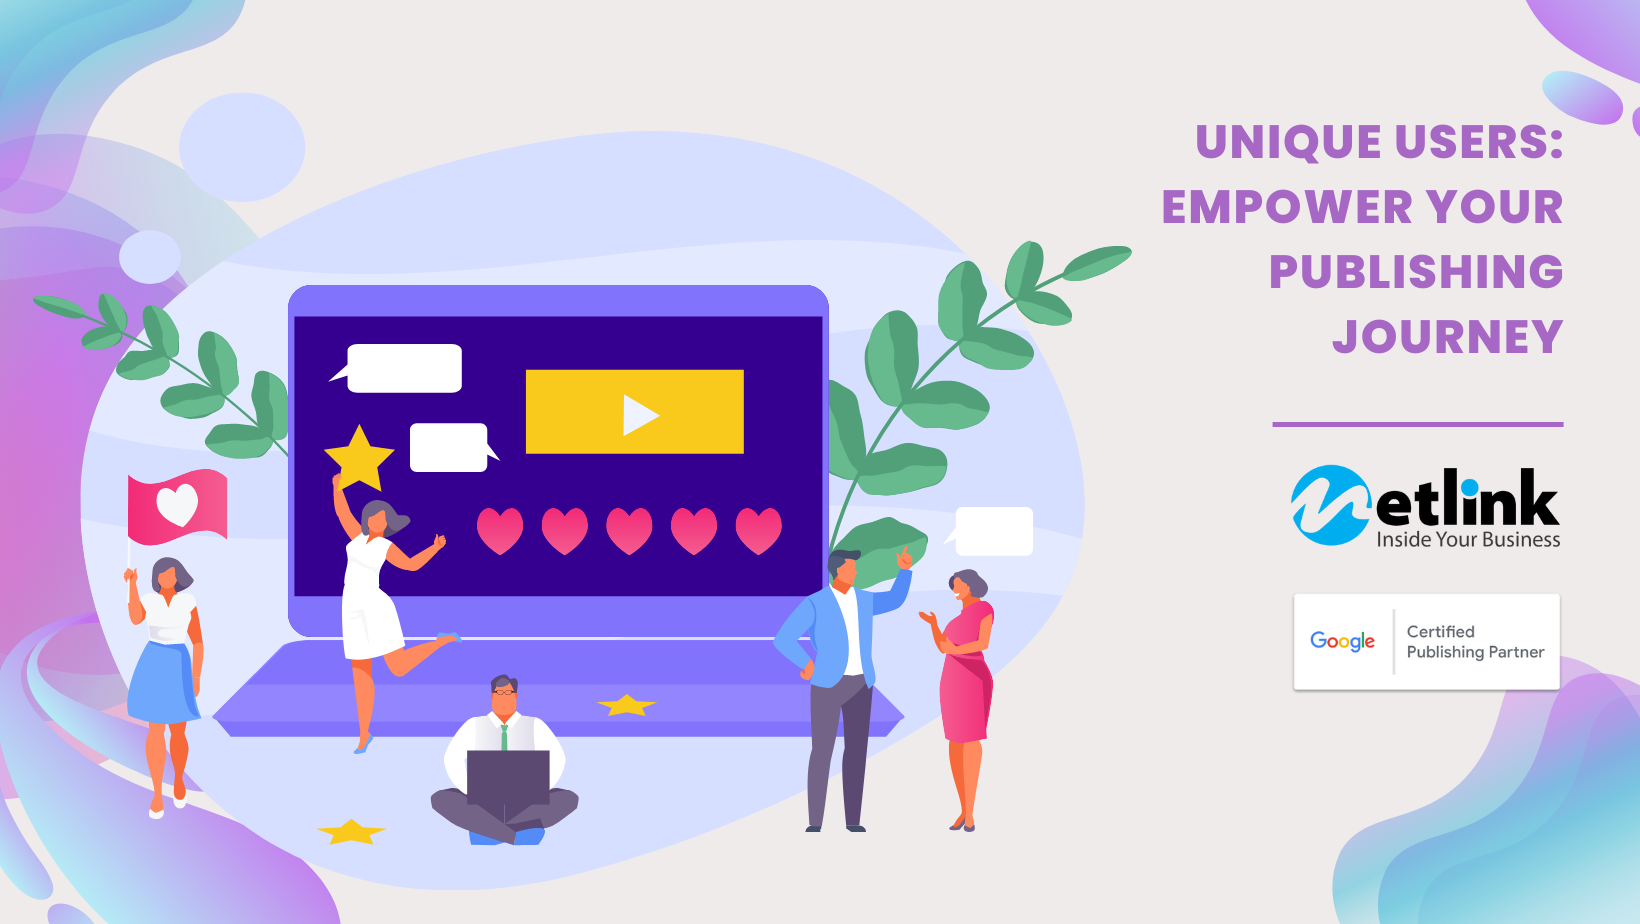 Unique Users: Empower Your Publishing Journey